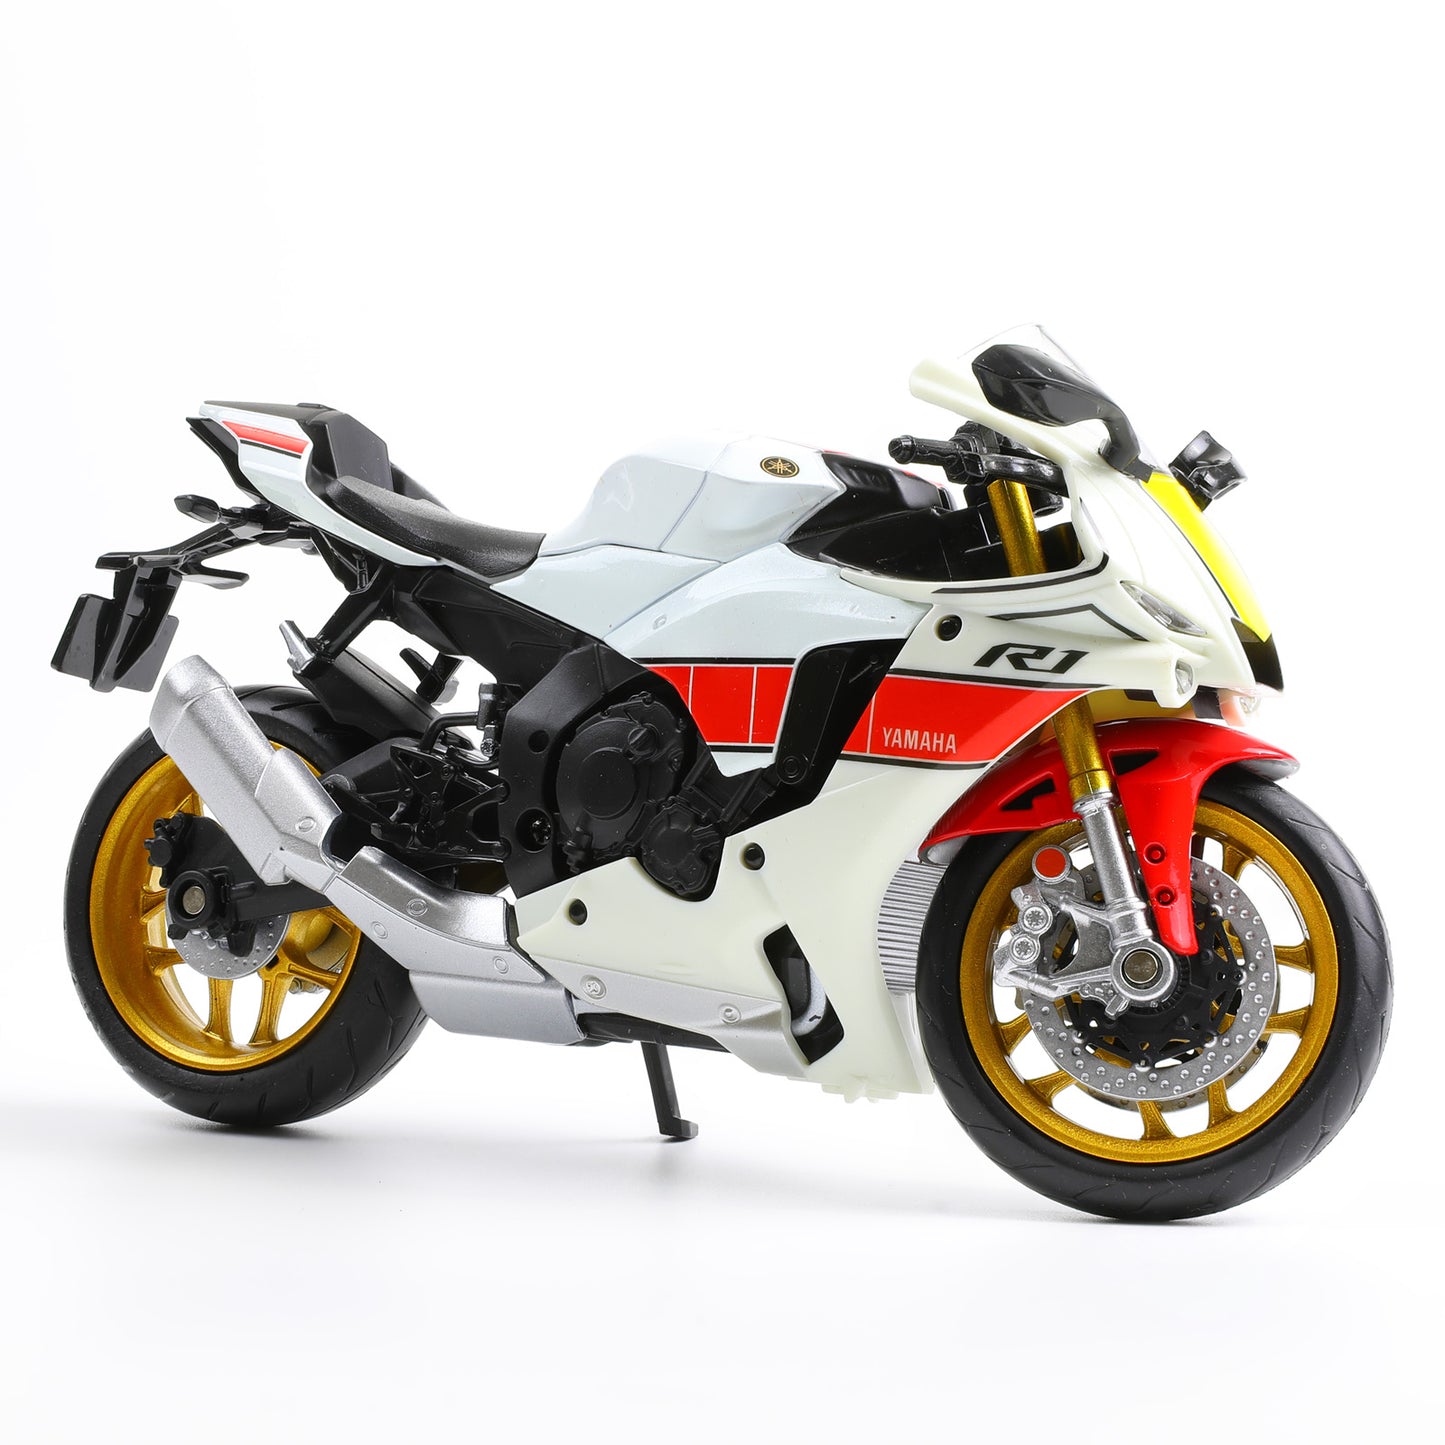 DieCast Motorcycle Model for YAMAHA R1M, Realistic Motorcycle Metal Model, 1:12 Scale Kids Moto Toy or Collection,MAKEDA Pre-Built Toys Gift